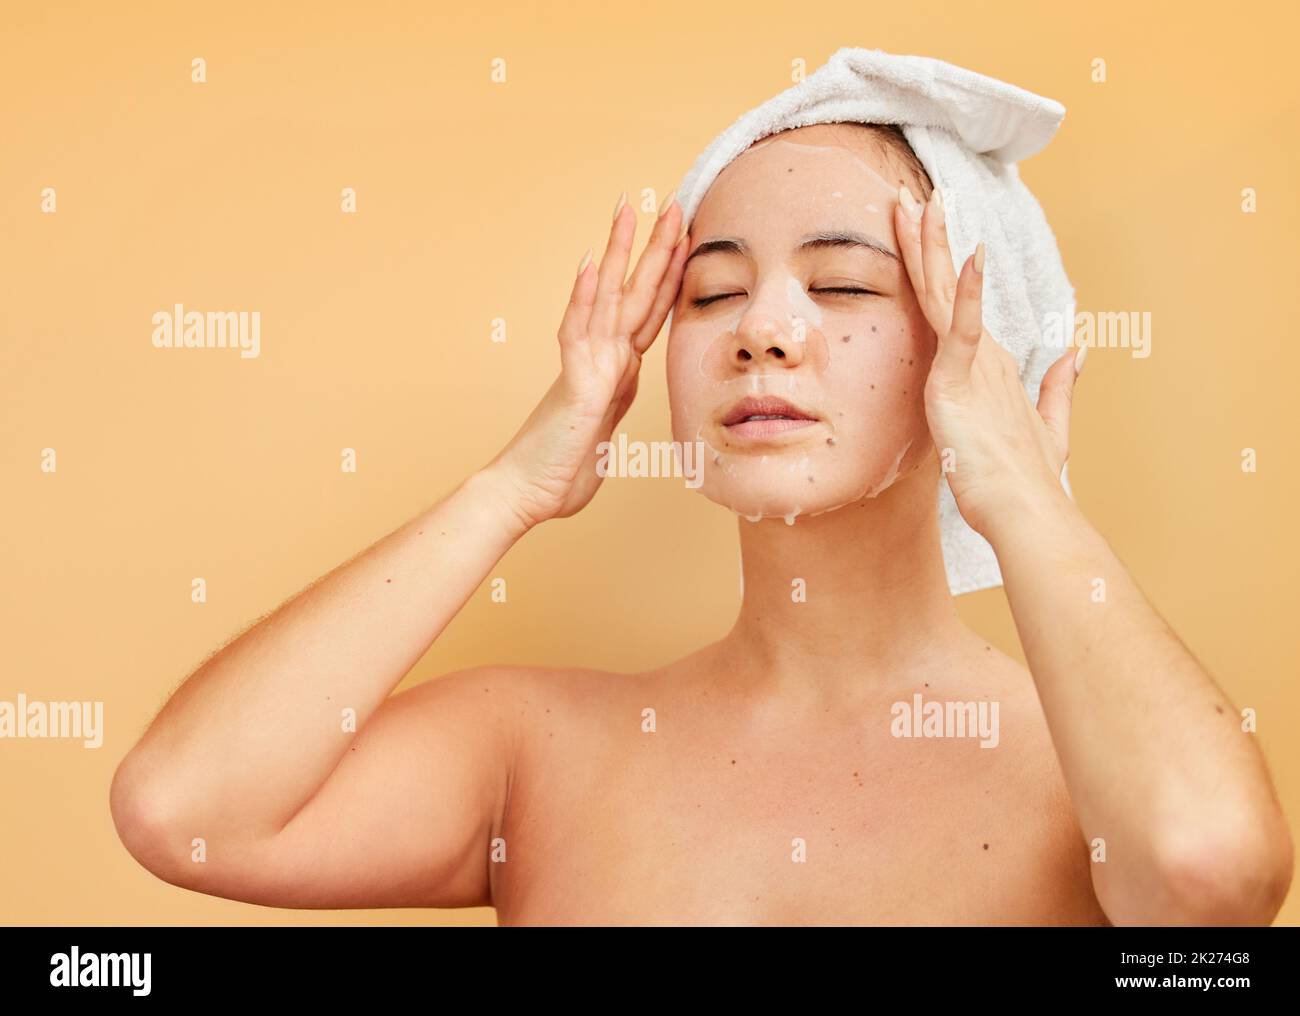 Make time to treat yourself. Shot of a young woman applying a face mask during her morning beauty routine against a yellow background. Stock Photo